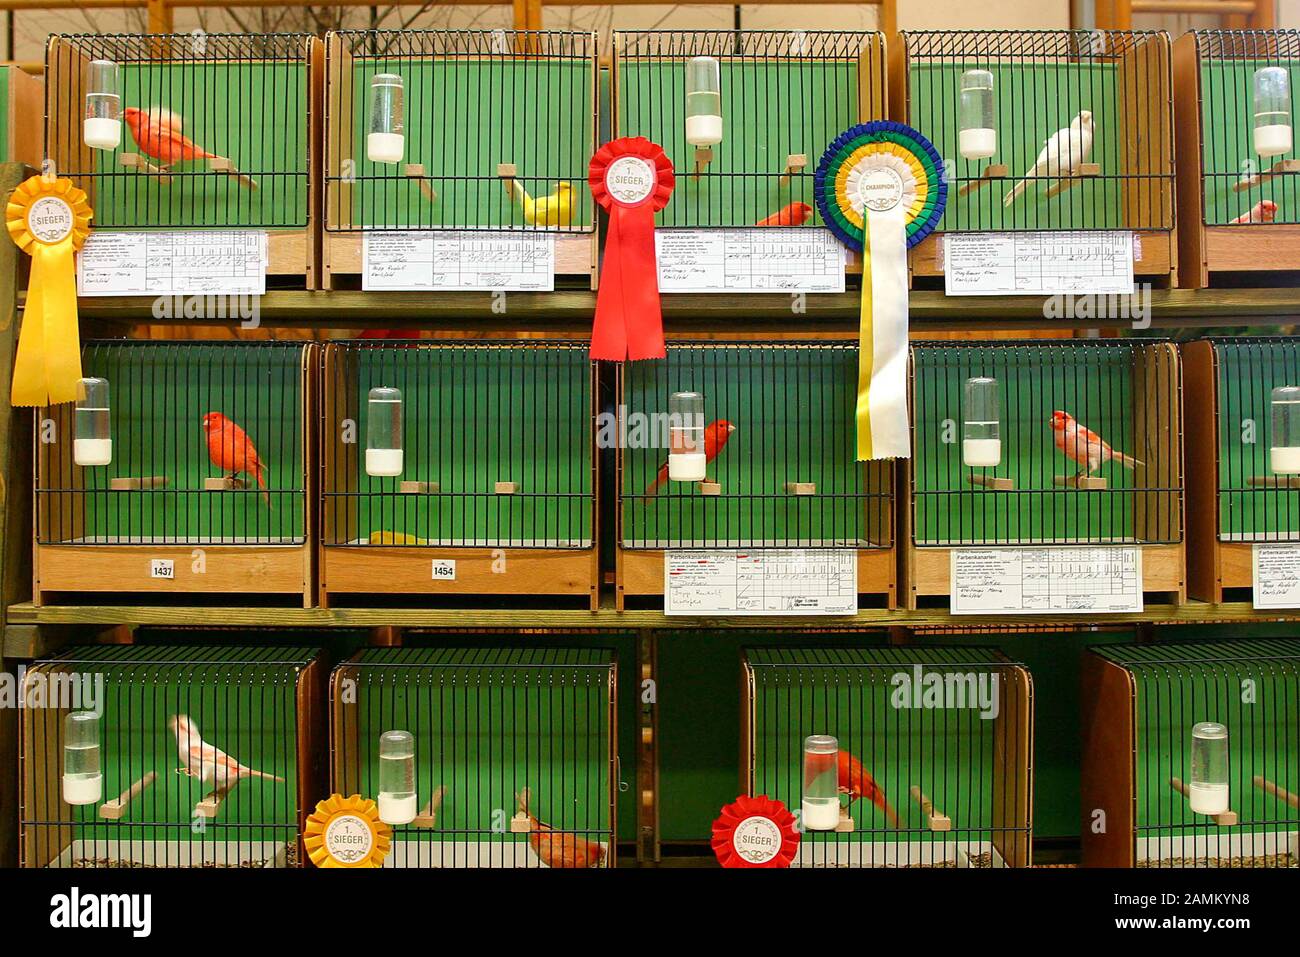 The winners at the bird show in the gym on Brunngartenstraße in Dachau. [automated translation] Stock Photo